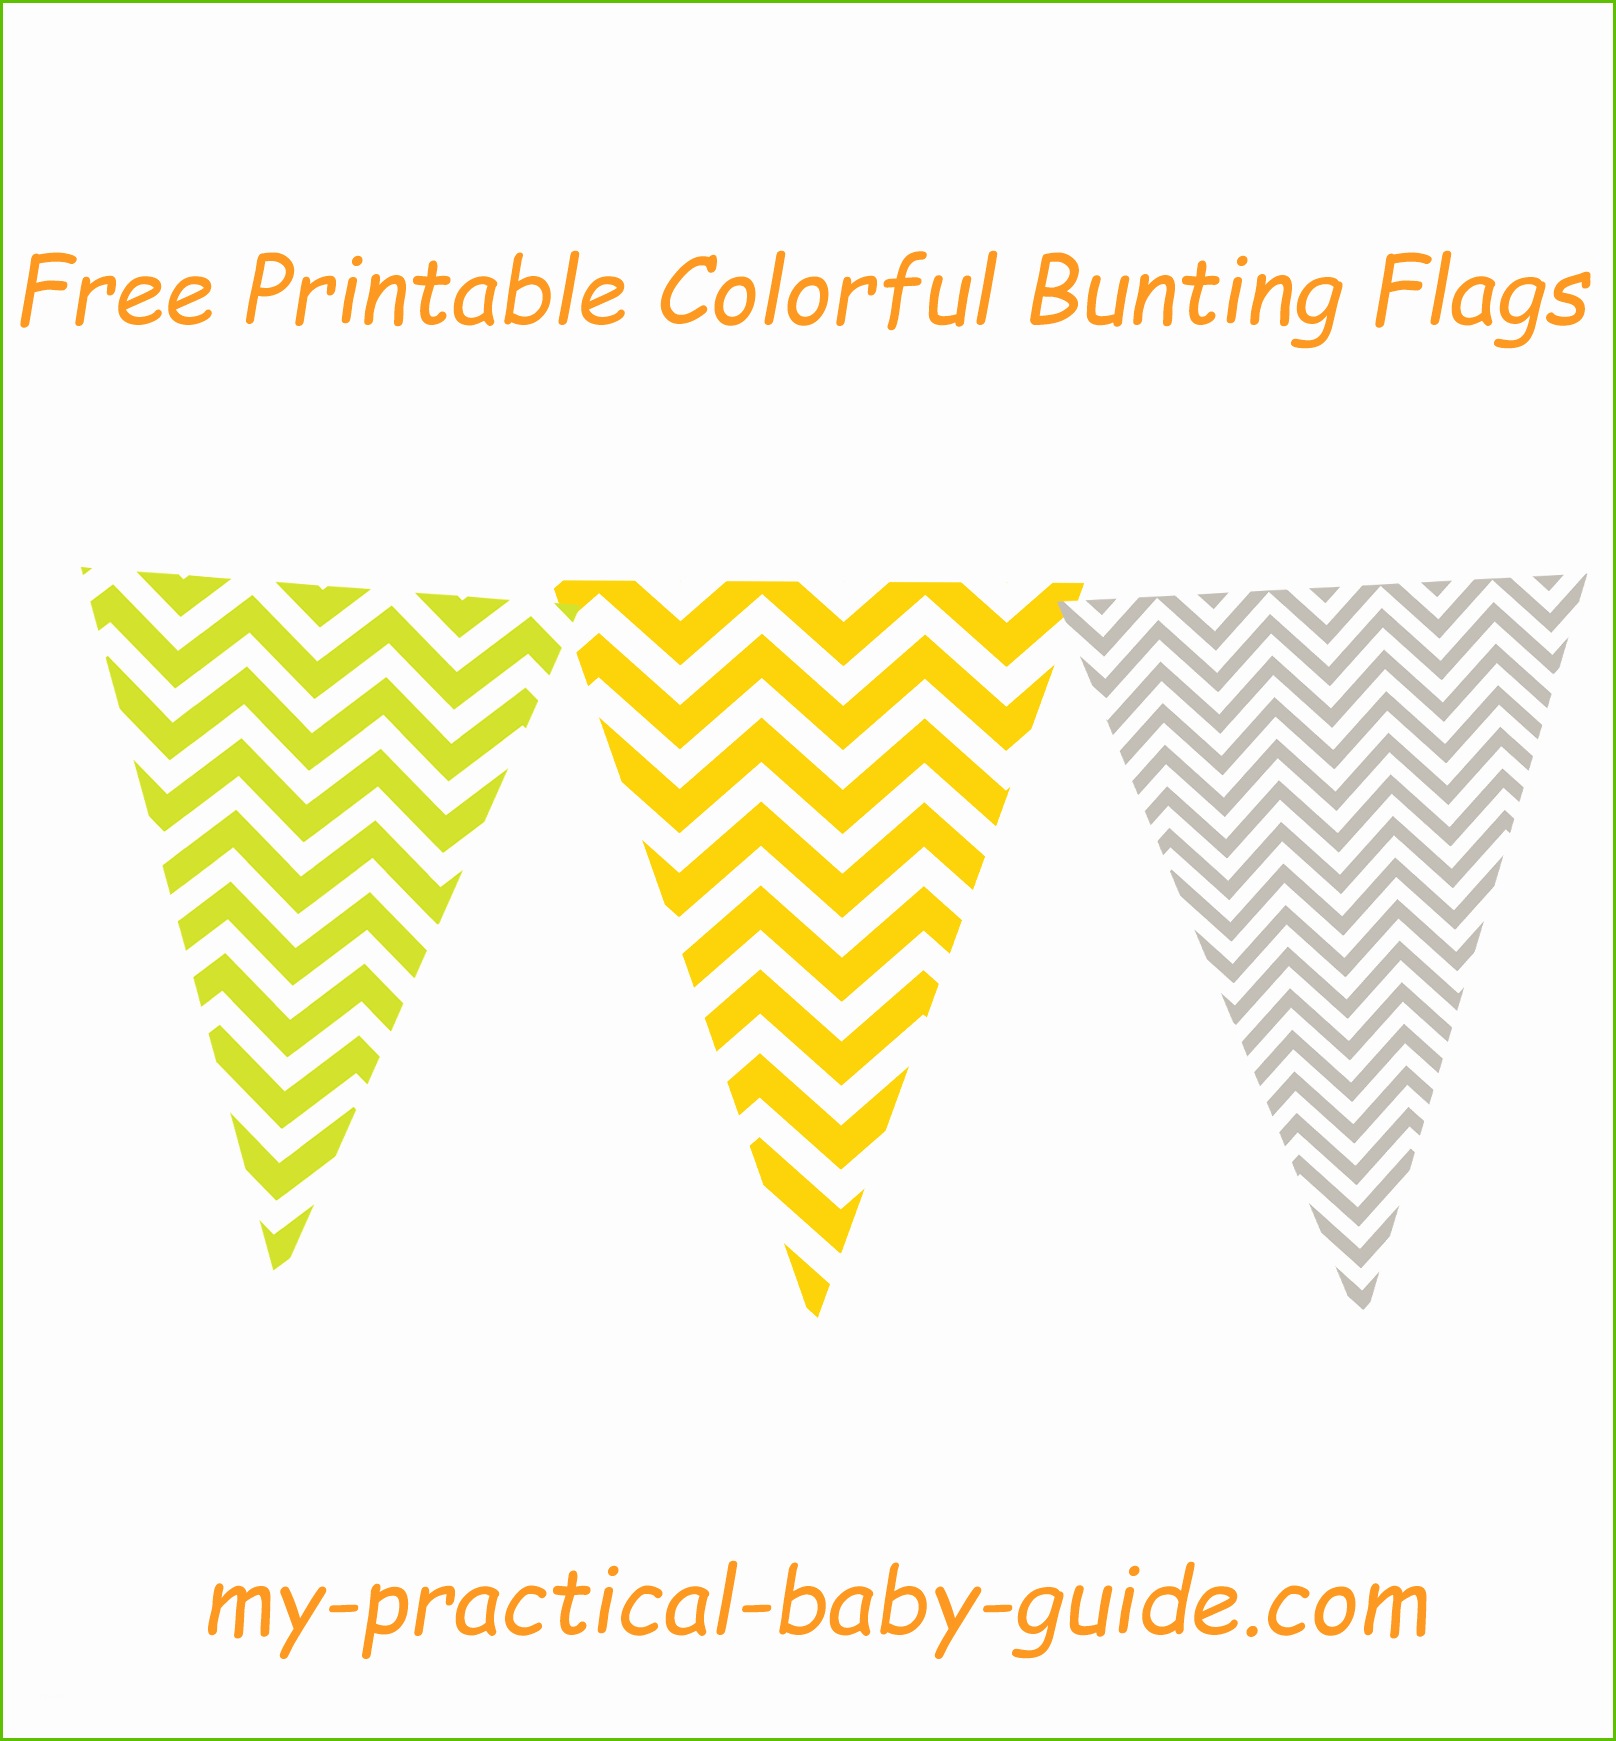 Full Size of Baby Shower:89+ Indulging Baby Shower Banner Picture Inspirations Baby Shower Banner Printable Elegant Elephant Baby Shower Banner Baby Shower Banner Printable Awesome Free Printable Colorful Chevron Bunting Flags Lime Green